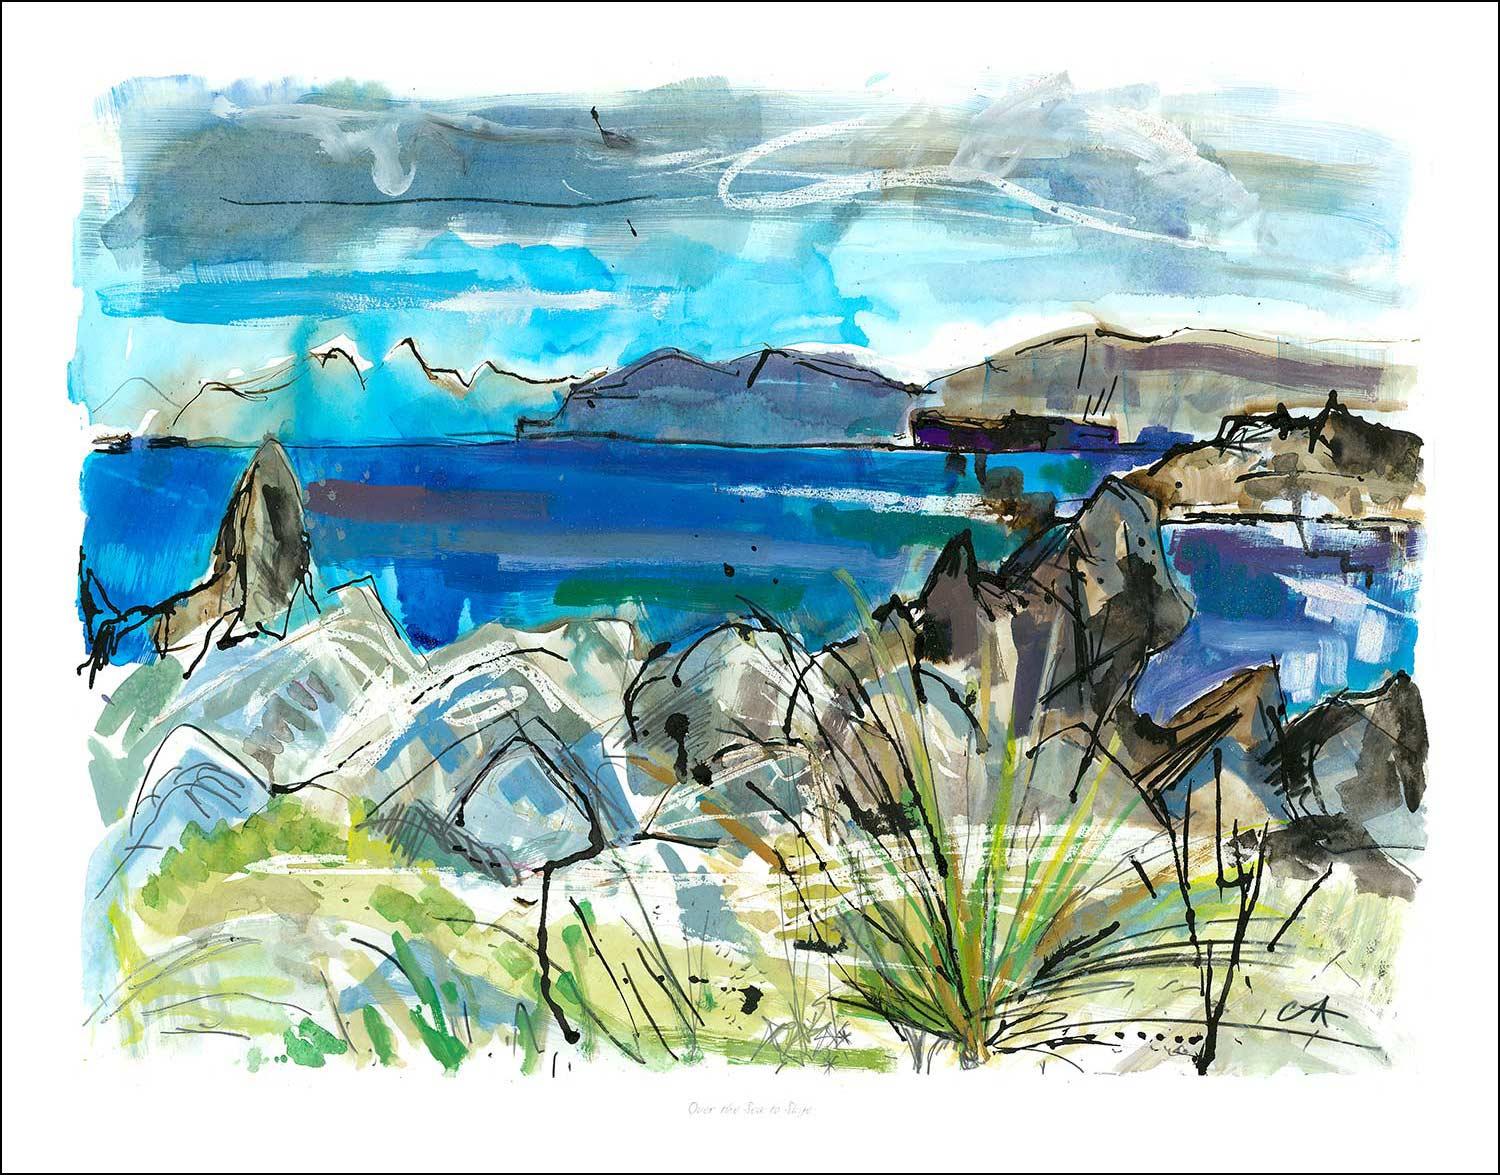 Over the Sea to Skye Art Print from an original painted by artist Clare Arbuthnott